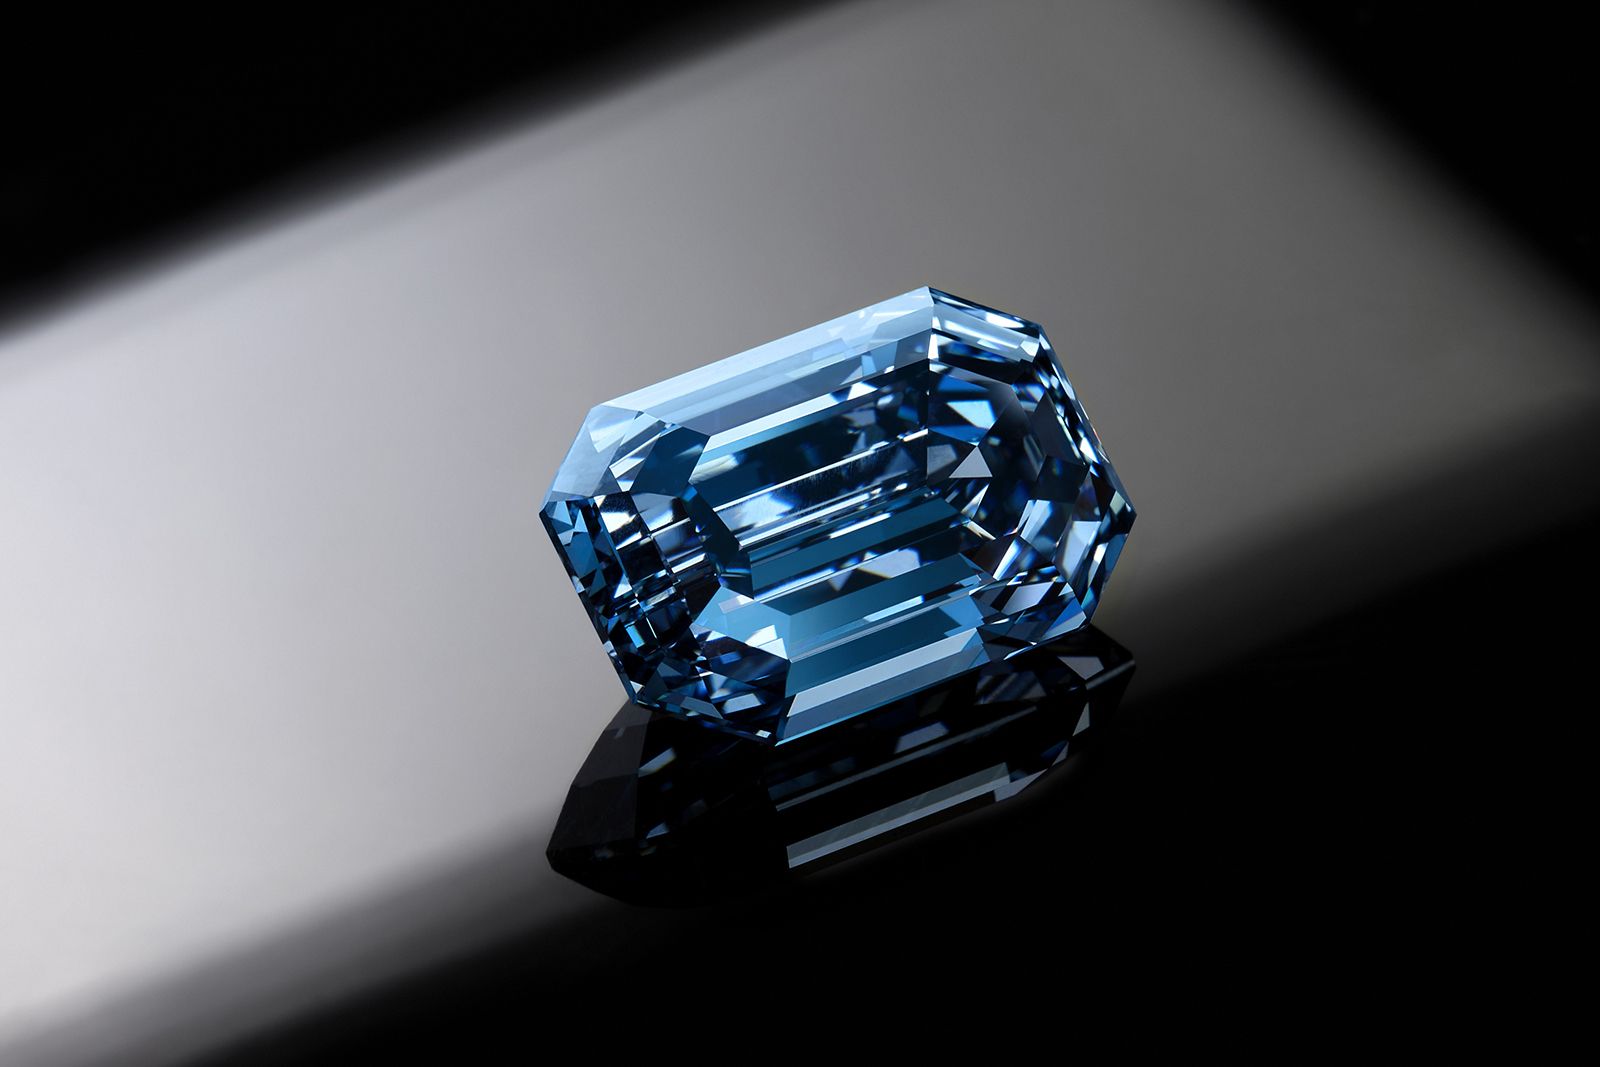 The De Beers Cullinan Blue Diamond has an estimate in excess of US$48 million